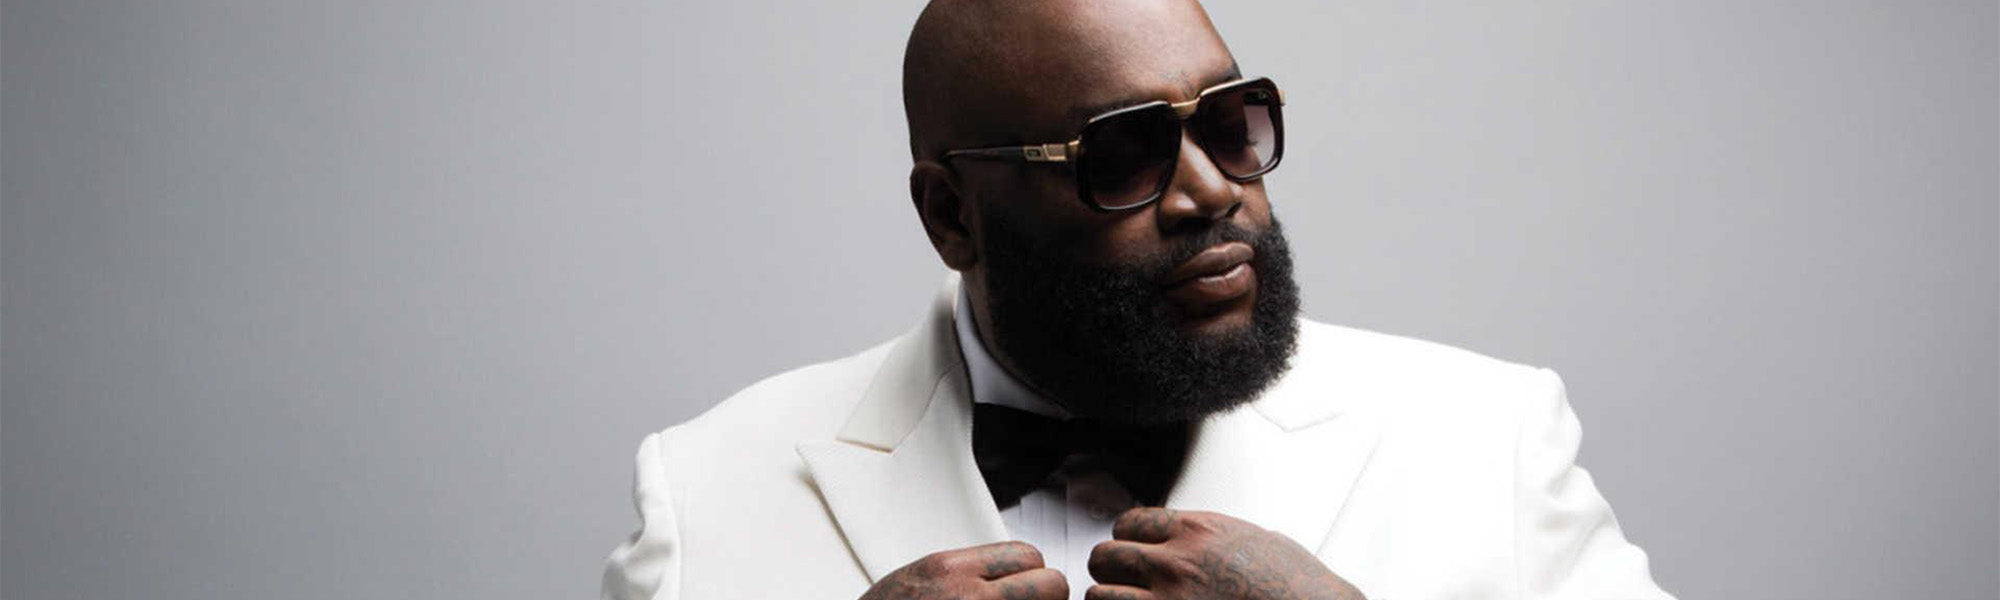 Rick Ross Jewelry: Check Out His 1.5 Million Dollar Chain